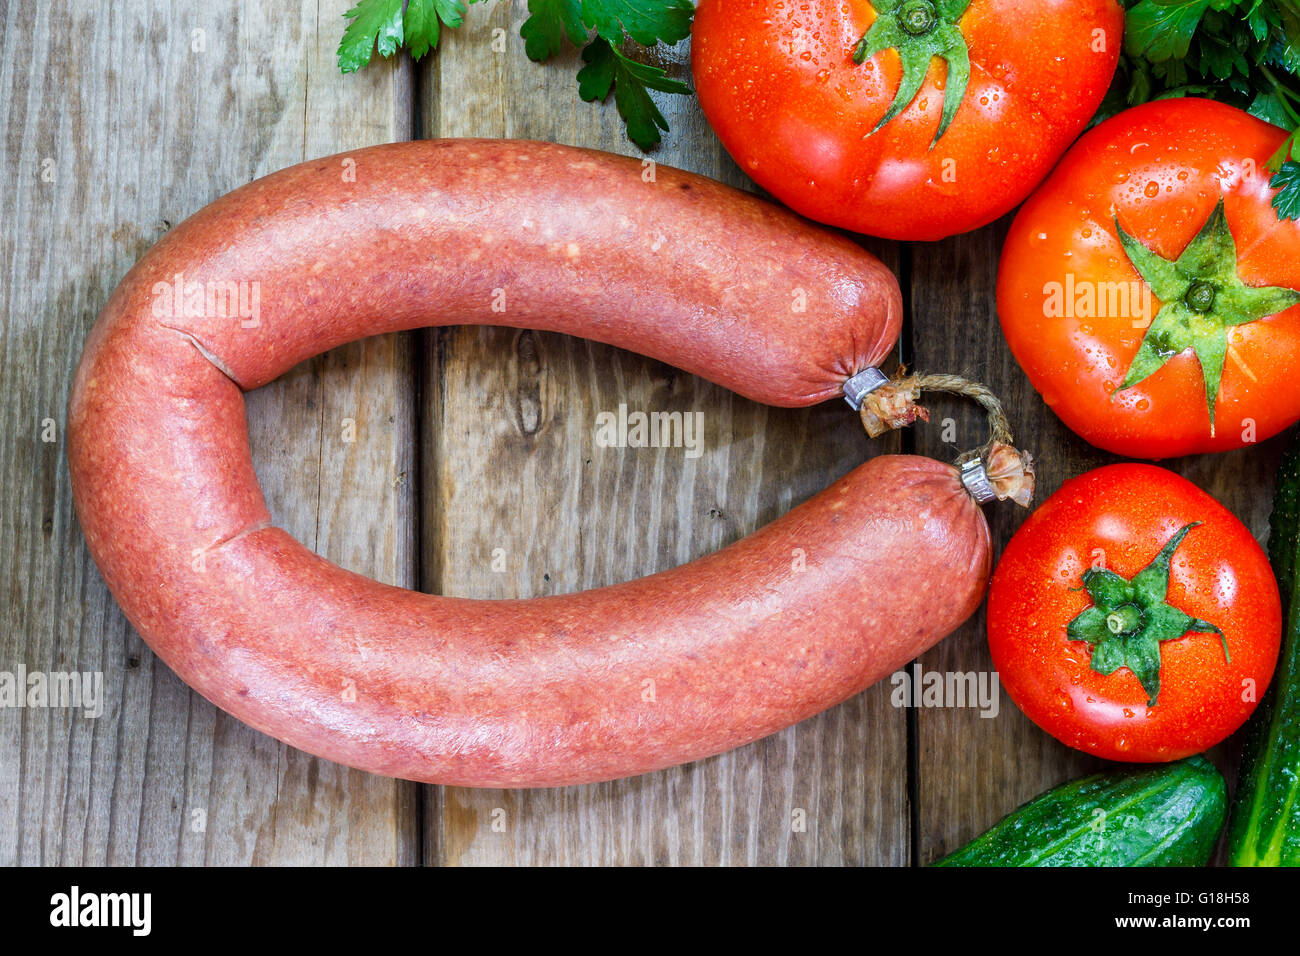 Beef sausage on wooden background with parsley, cucumber and tomato. Flat lay Stock Photo